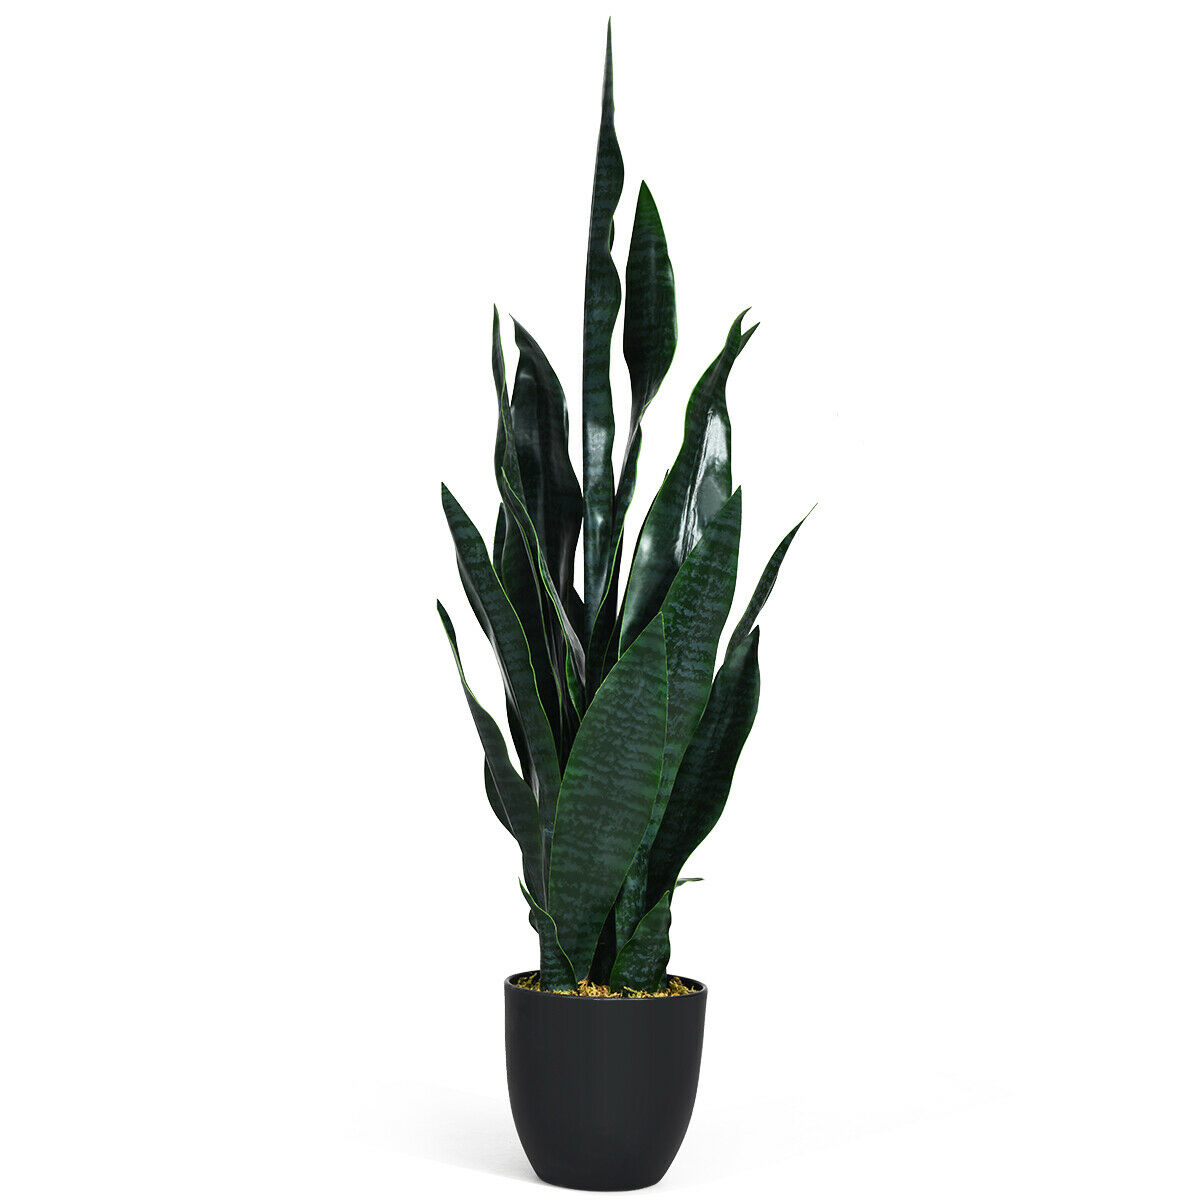 CROSOFMI Artificial Snake Plant 35.4 Inch Fake Sansevieria Tree with 32 Leaves Perfect Faux Plants in Pot for Indoor Outdoor House Home Office Garden Modern Decoration Housewarming Gift Yellow